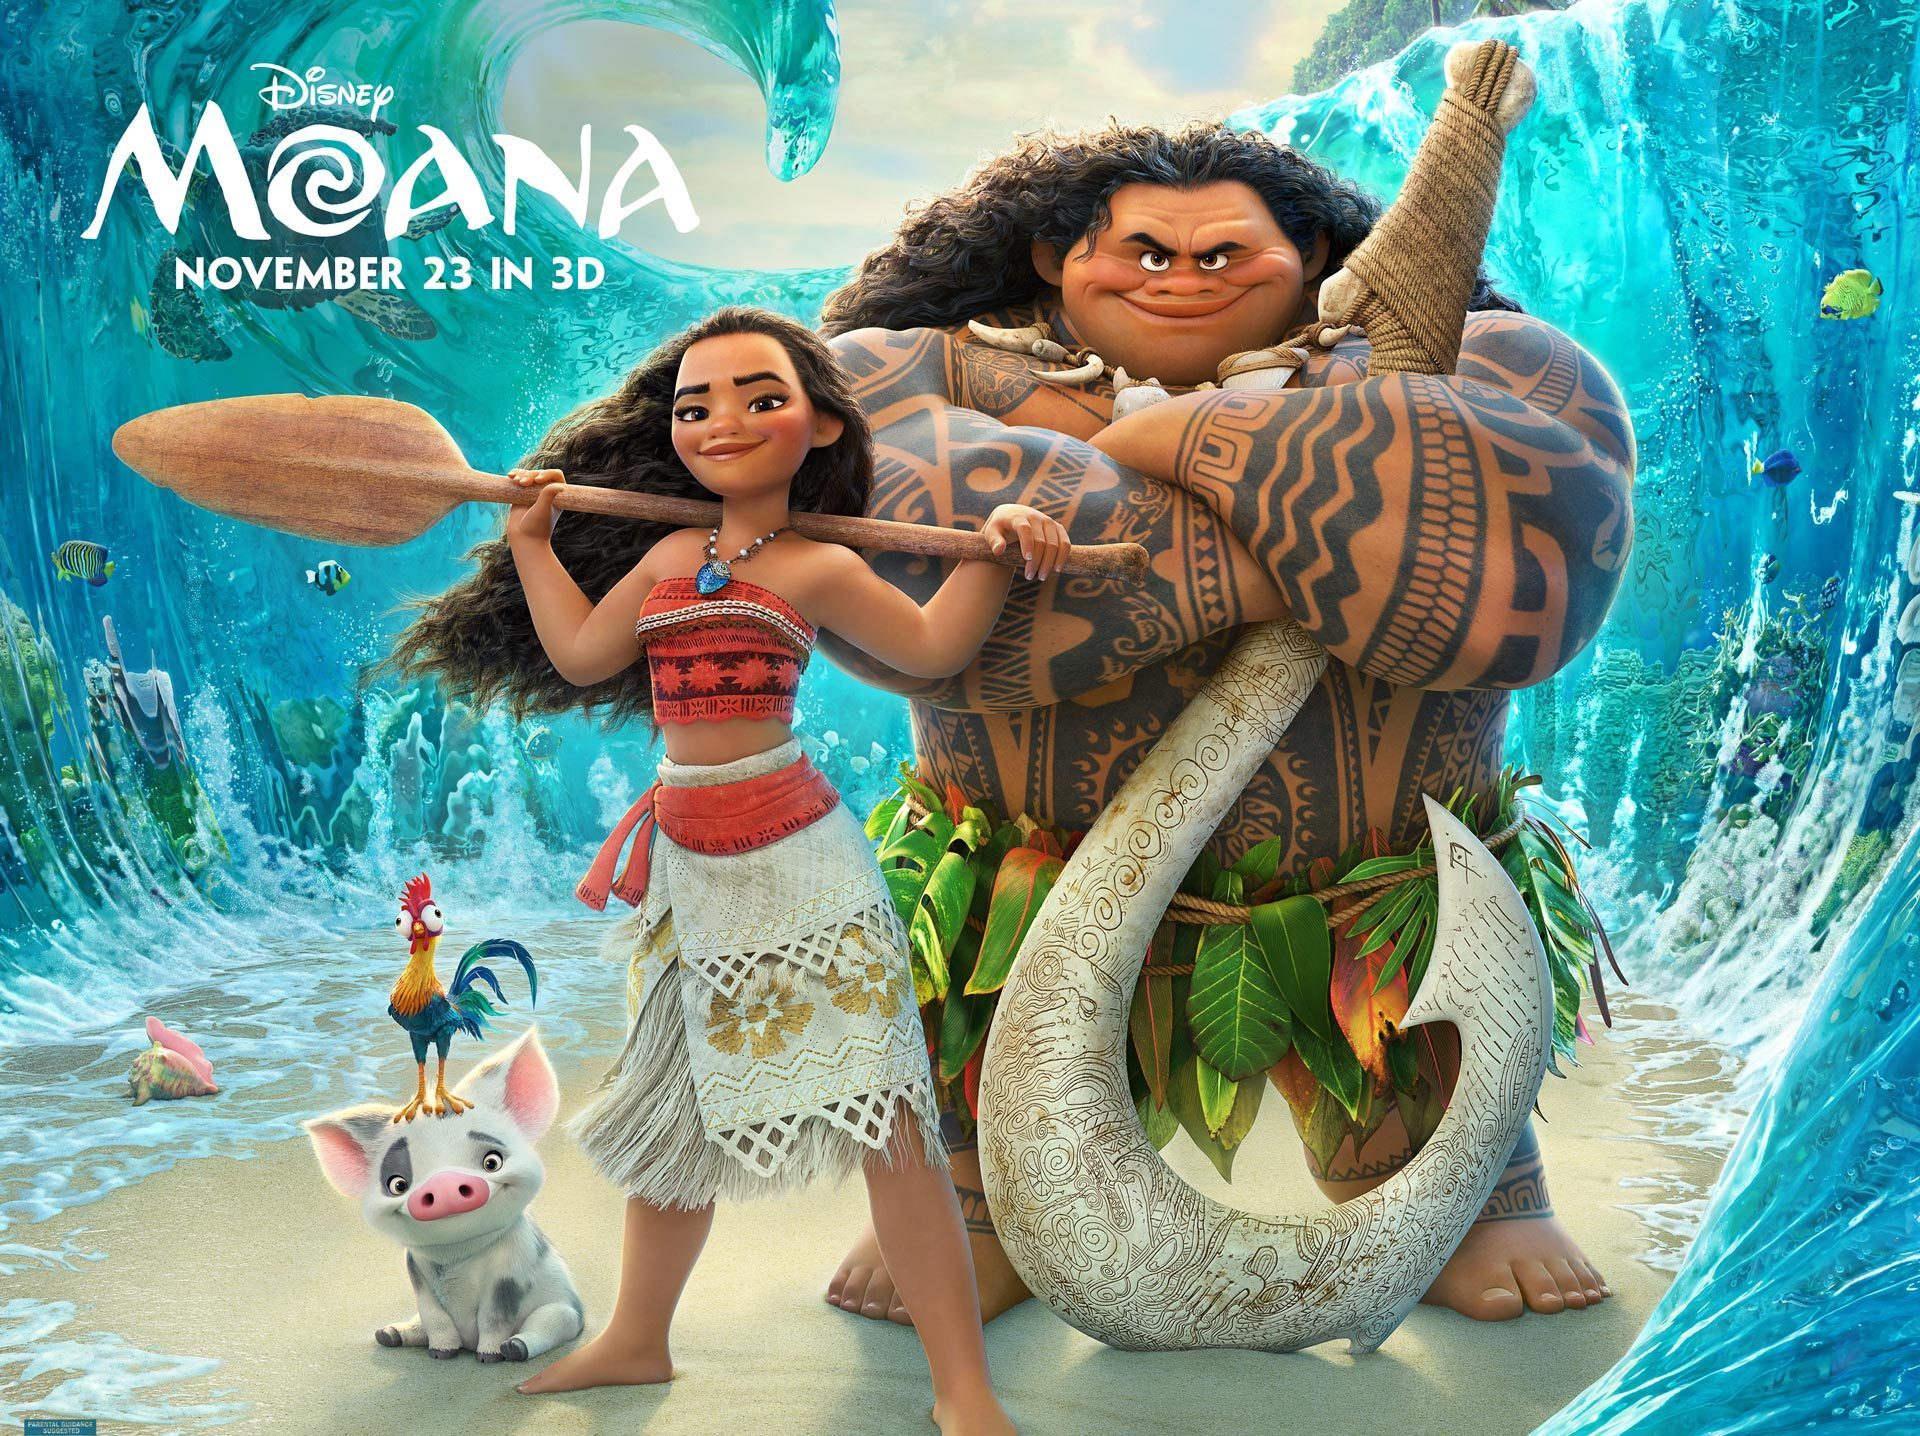 REVIEW: ‘Moana’ worthy of recent box office record